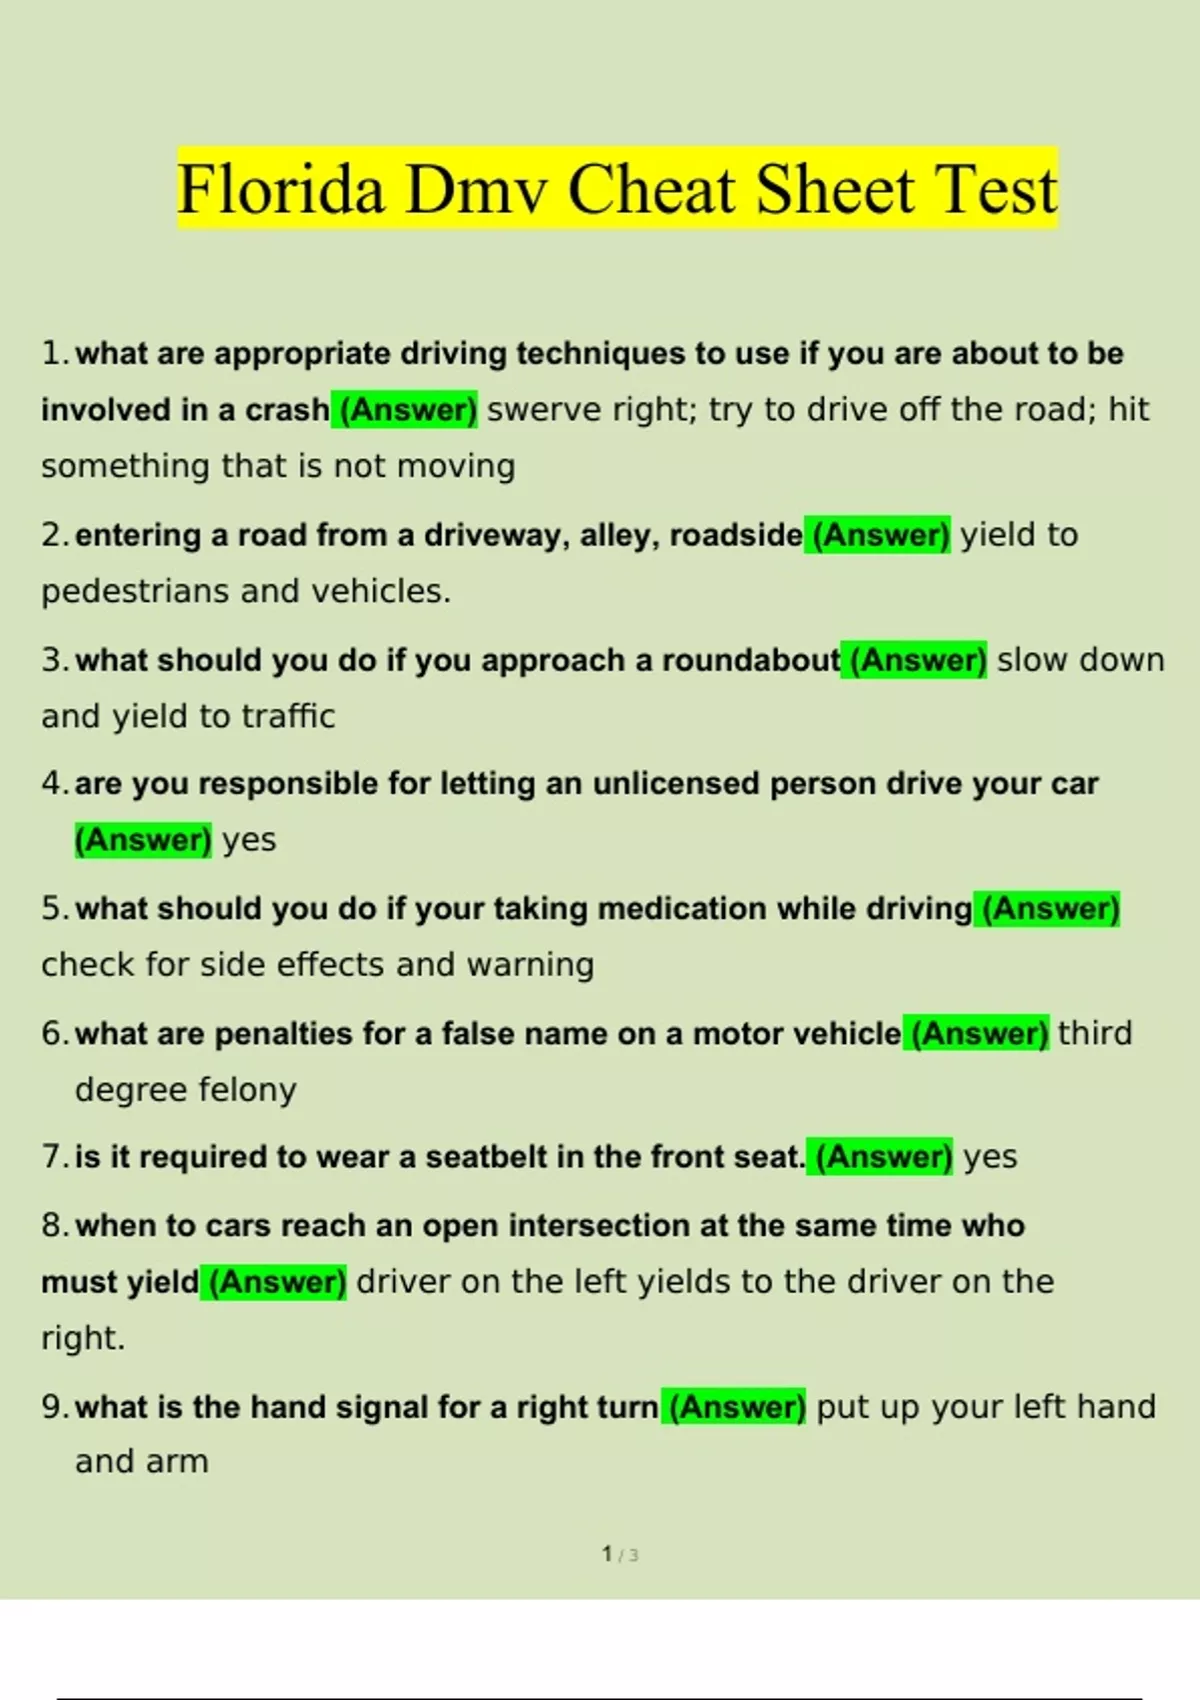 Florida DMV Cheat Sheet Test 2023 Questions and Answers (Verified